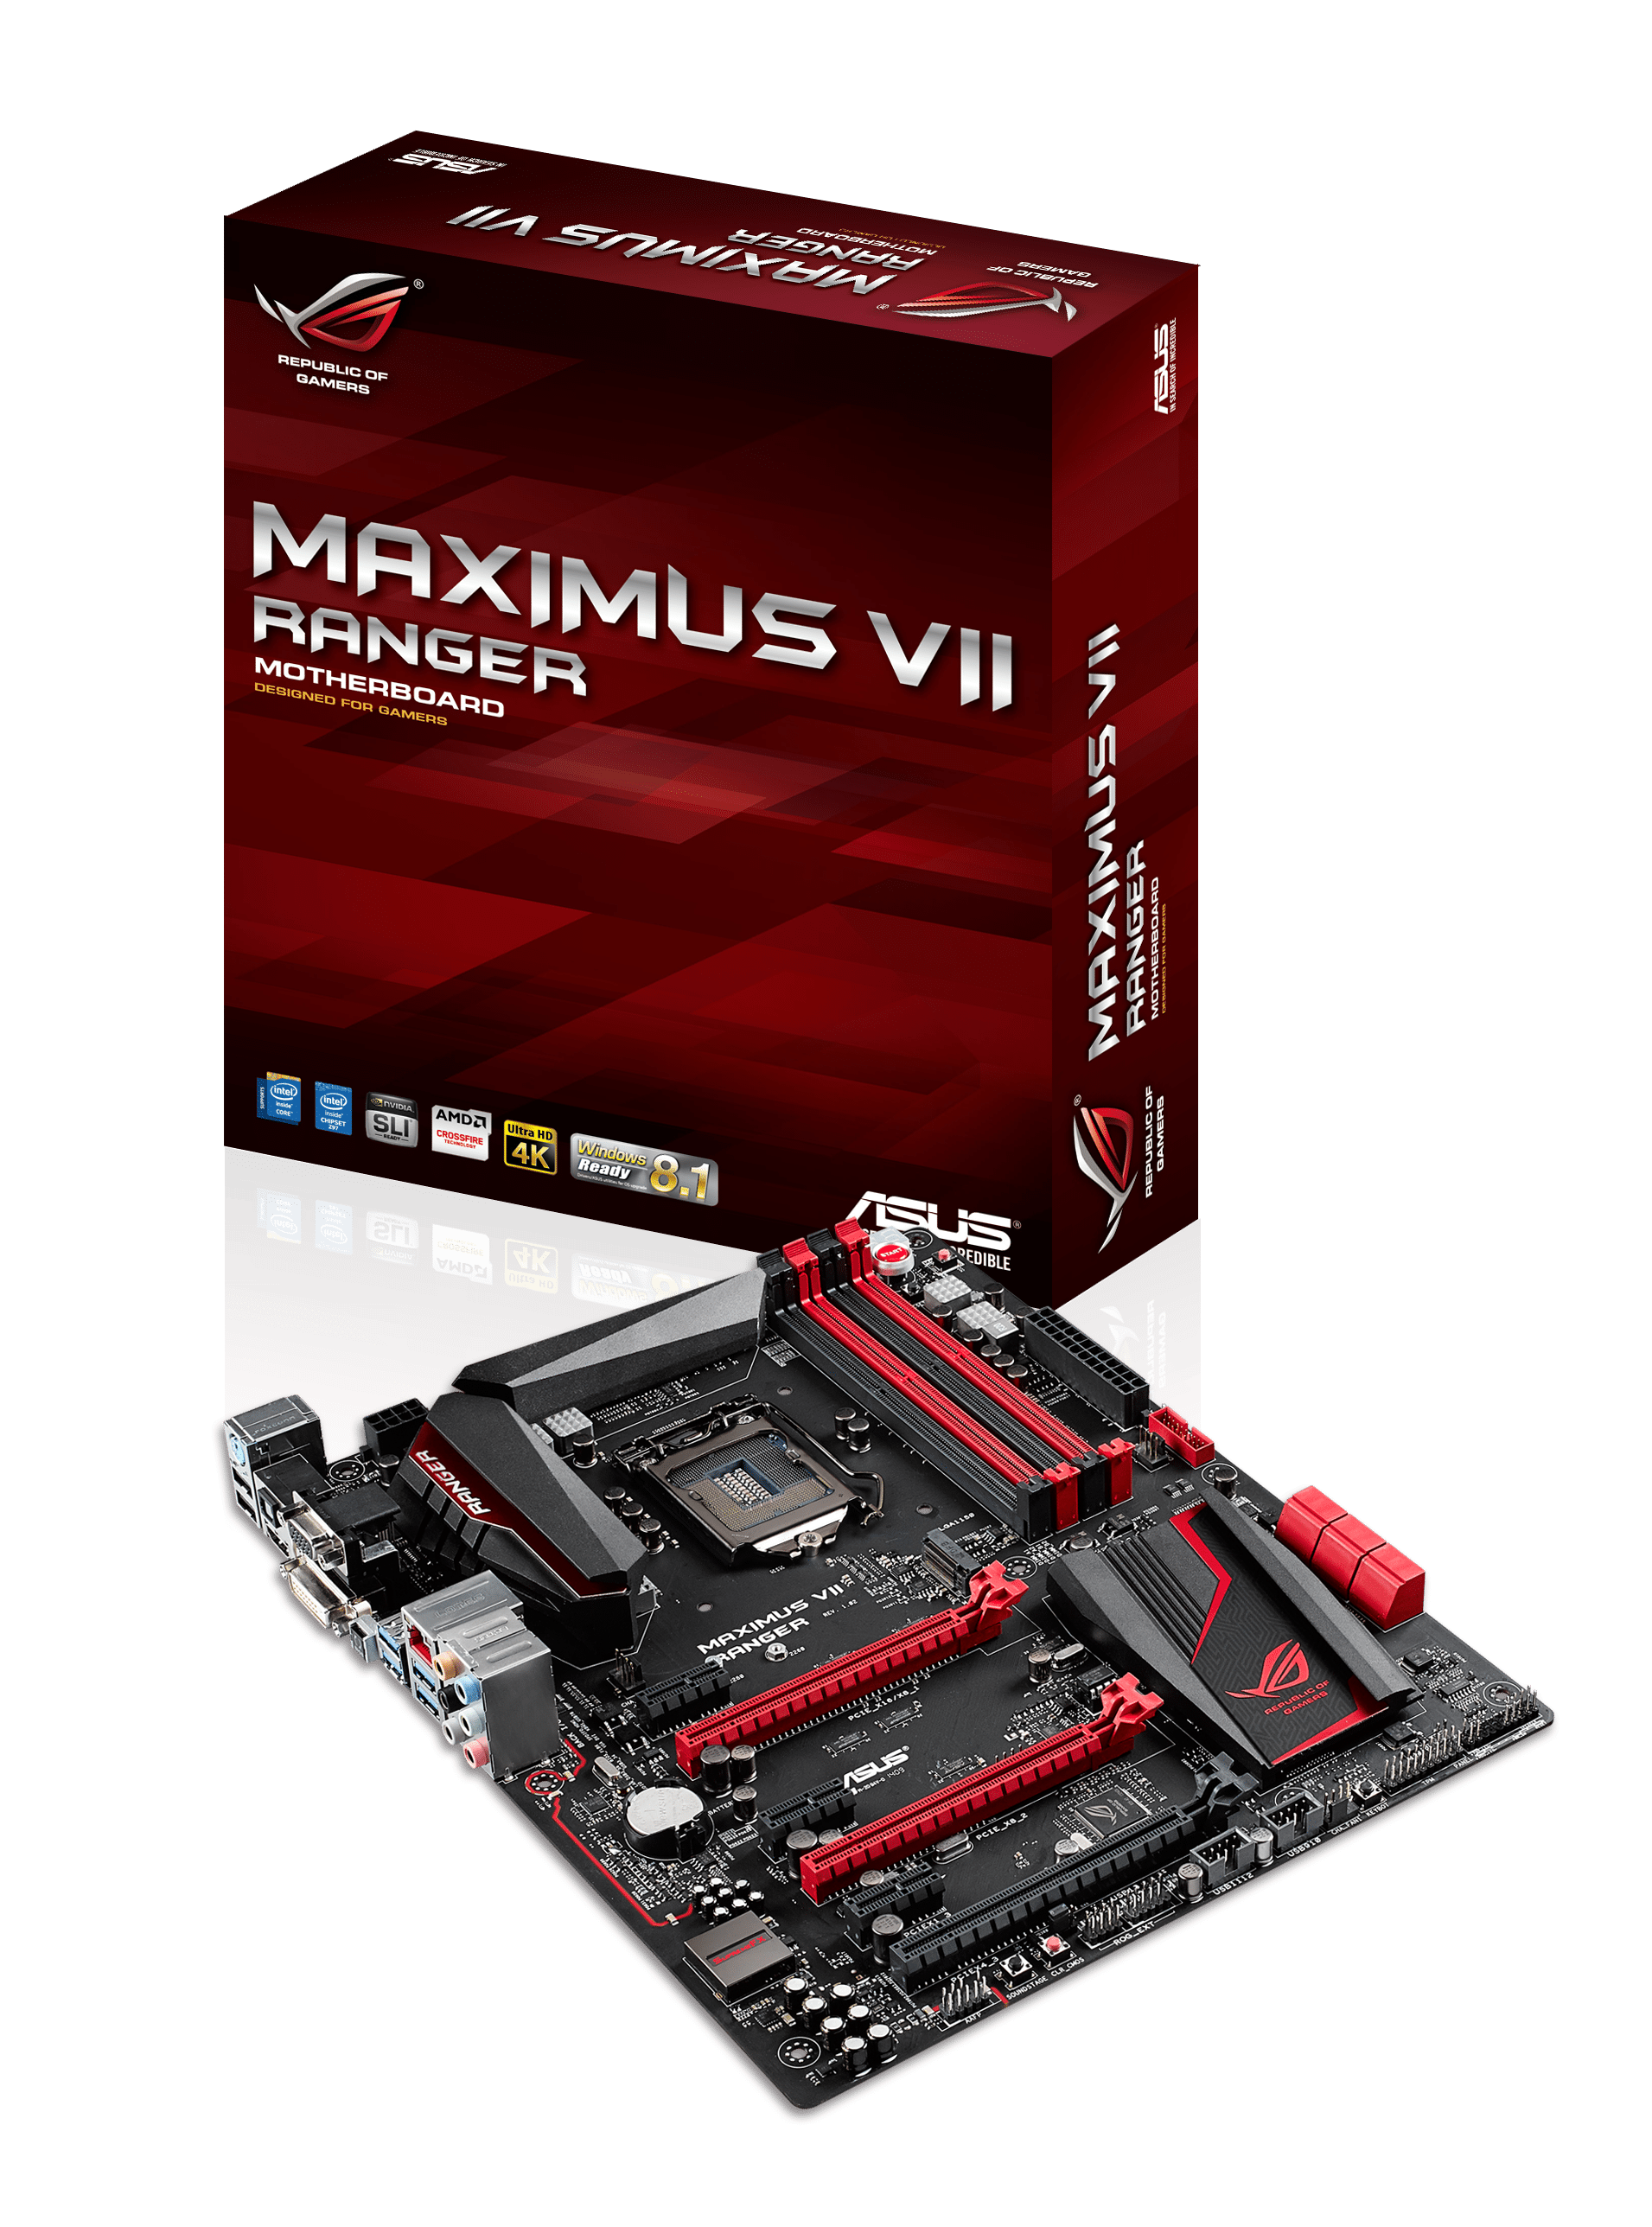 ASUS Introduces Three Intel Z97 based Maximus VII Gaming Motherboards 33